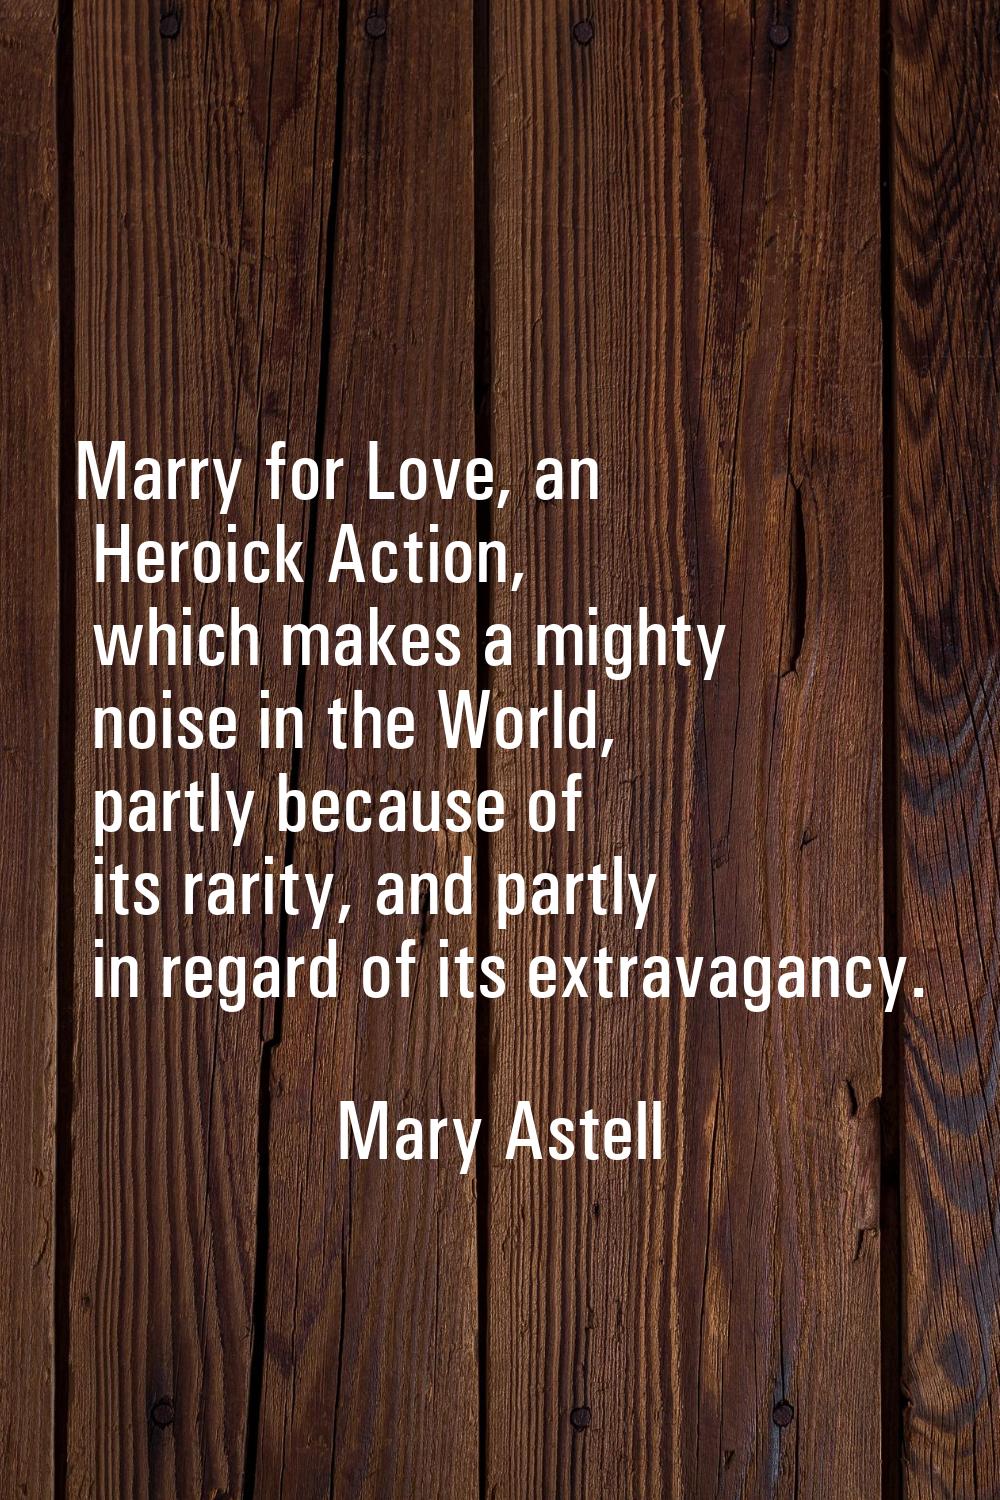 Marry for Love, an Heroick Action, which makes a mighty noise in the World, partly because of its r